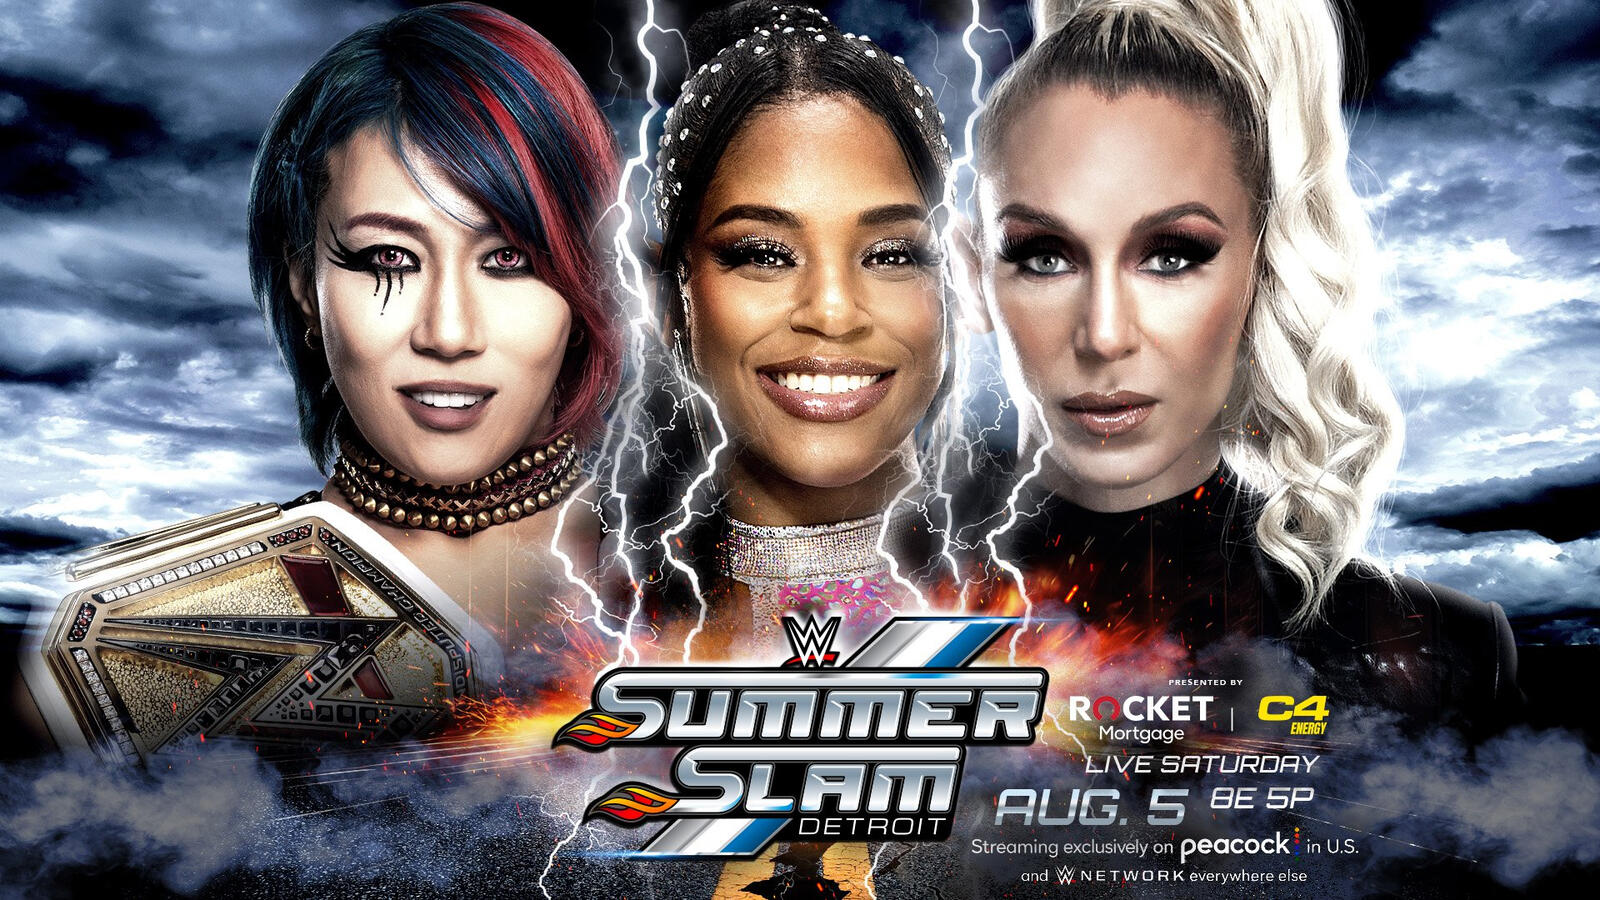 Triple Threat Match For The WWE Women's Title Confirmed For SummerSlam